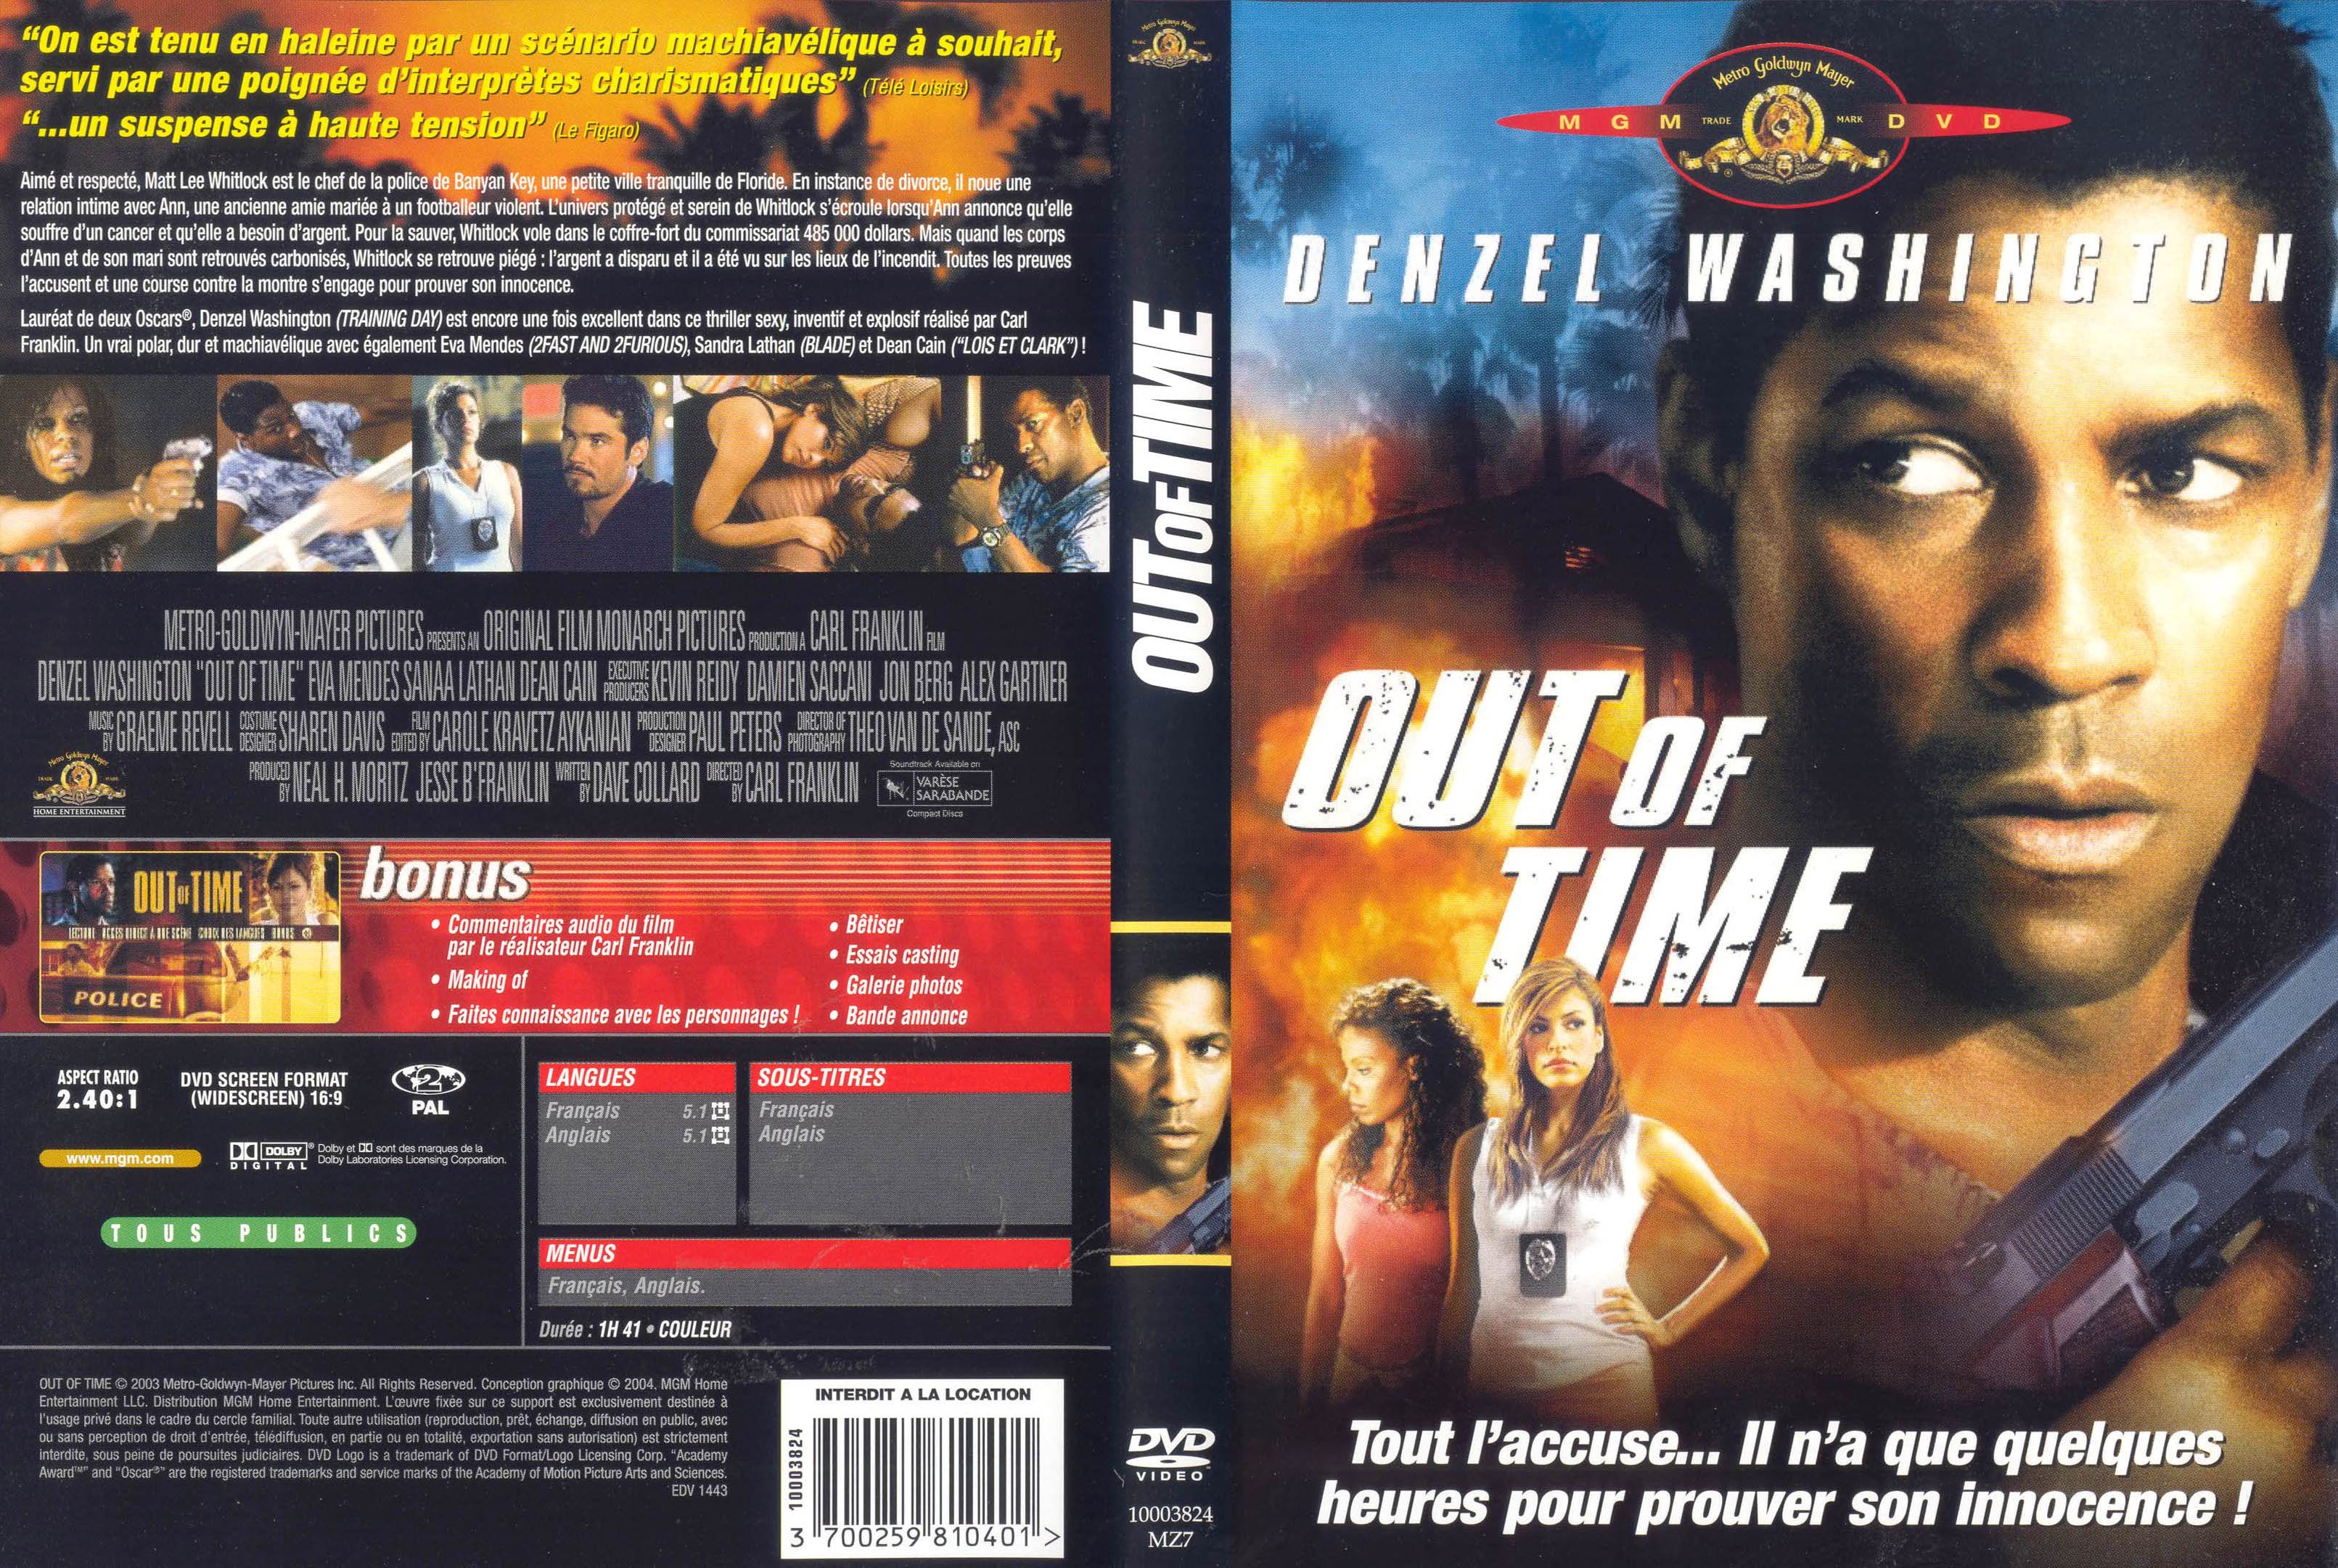 Jaquette DVD Out of time